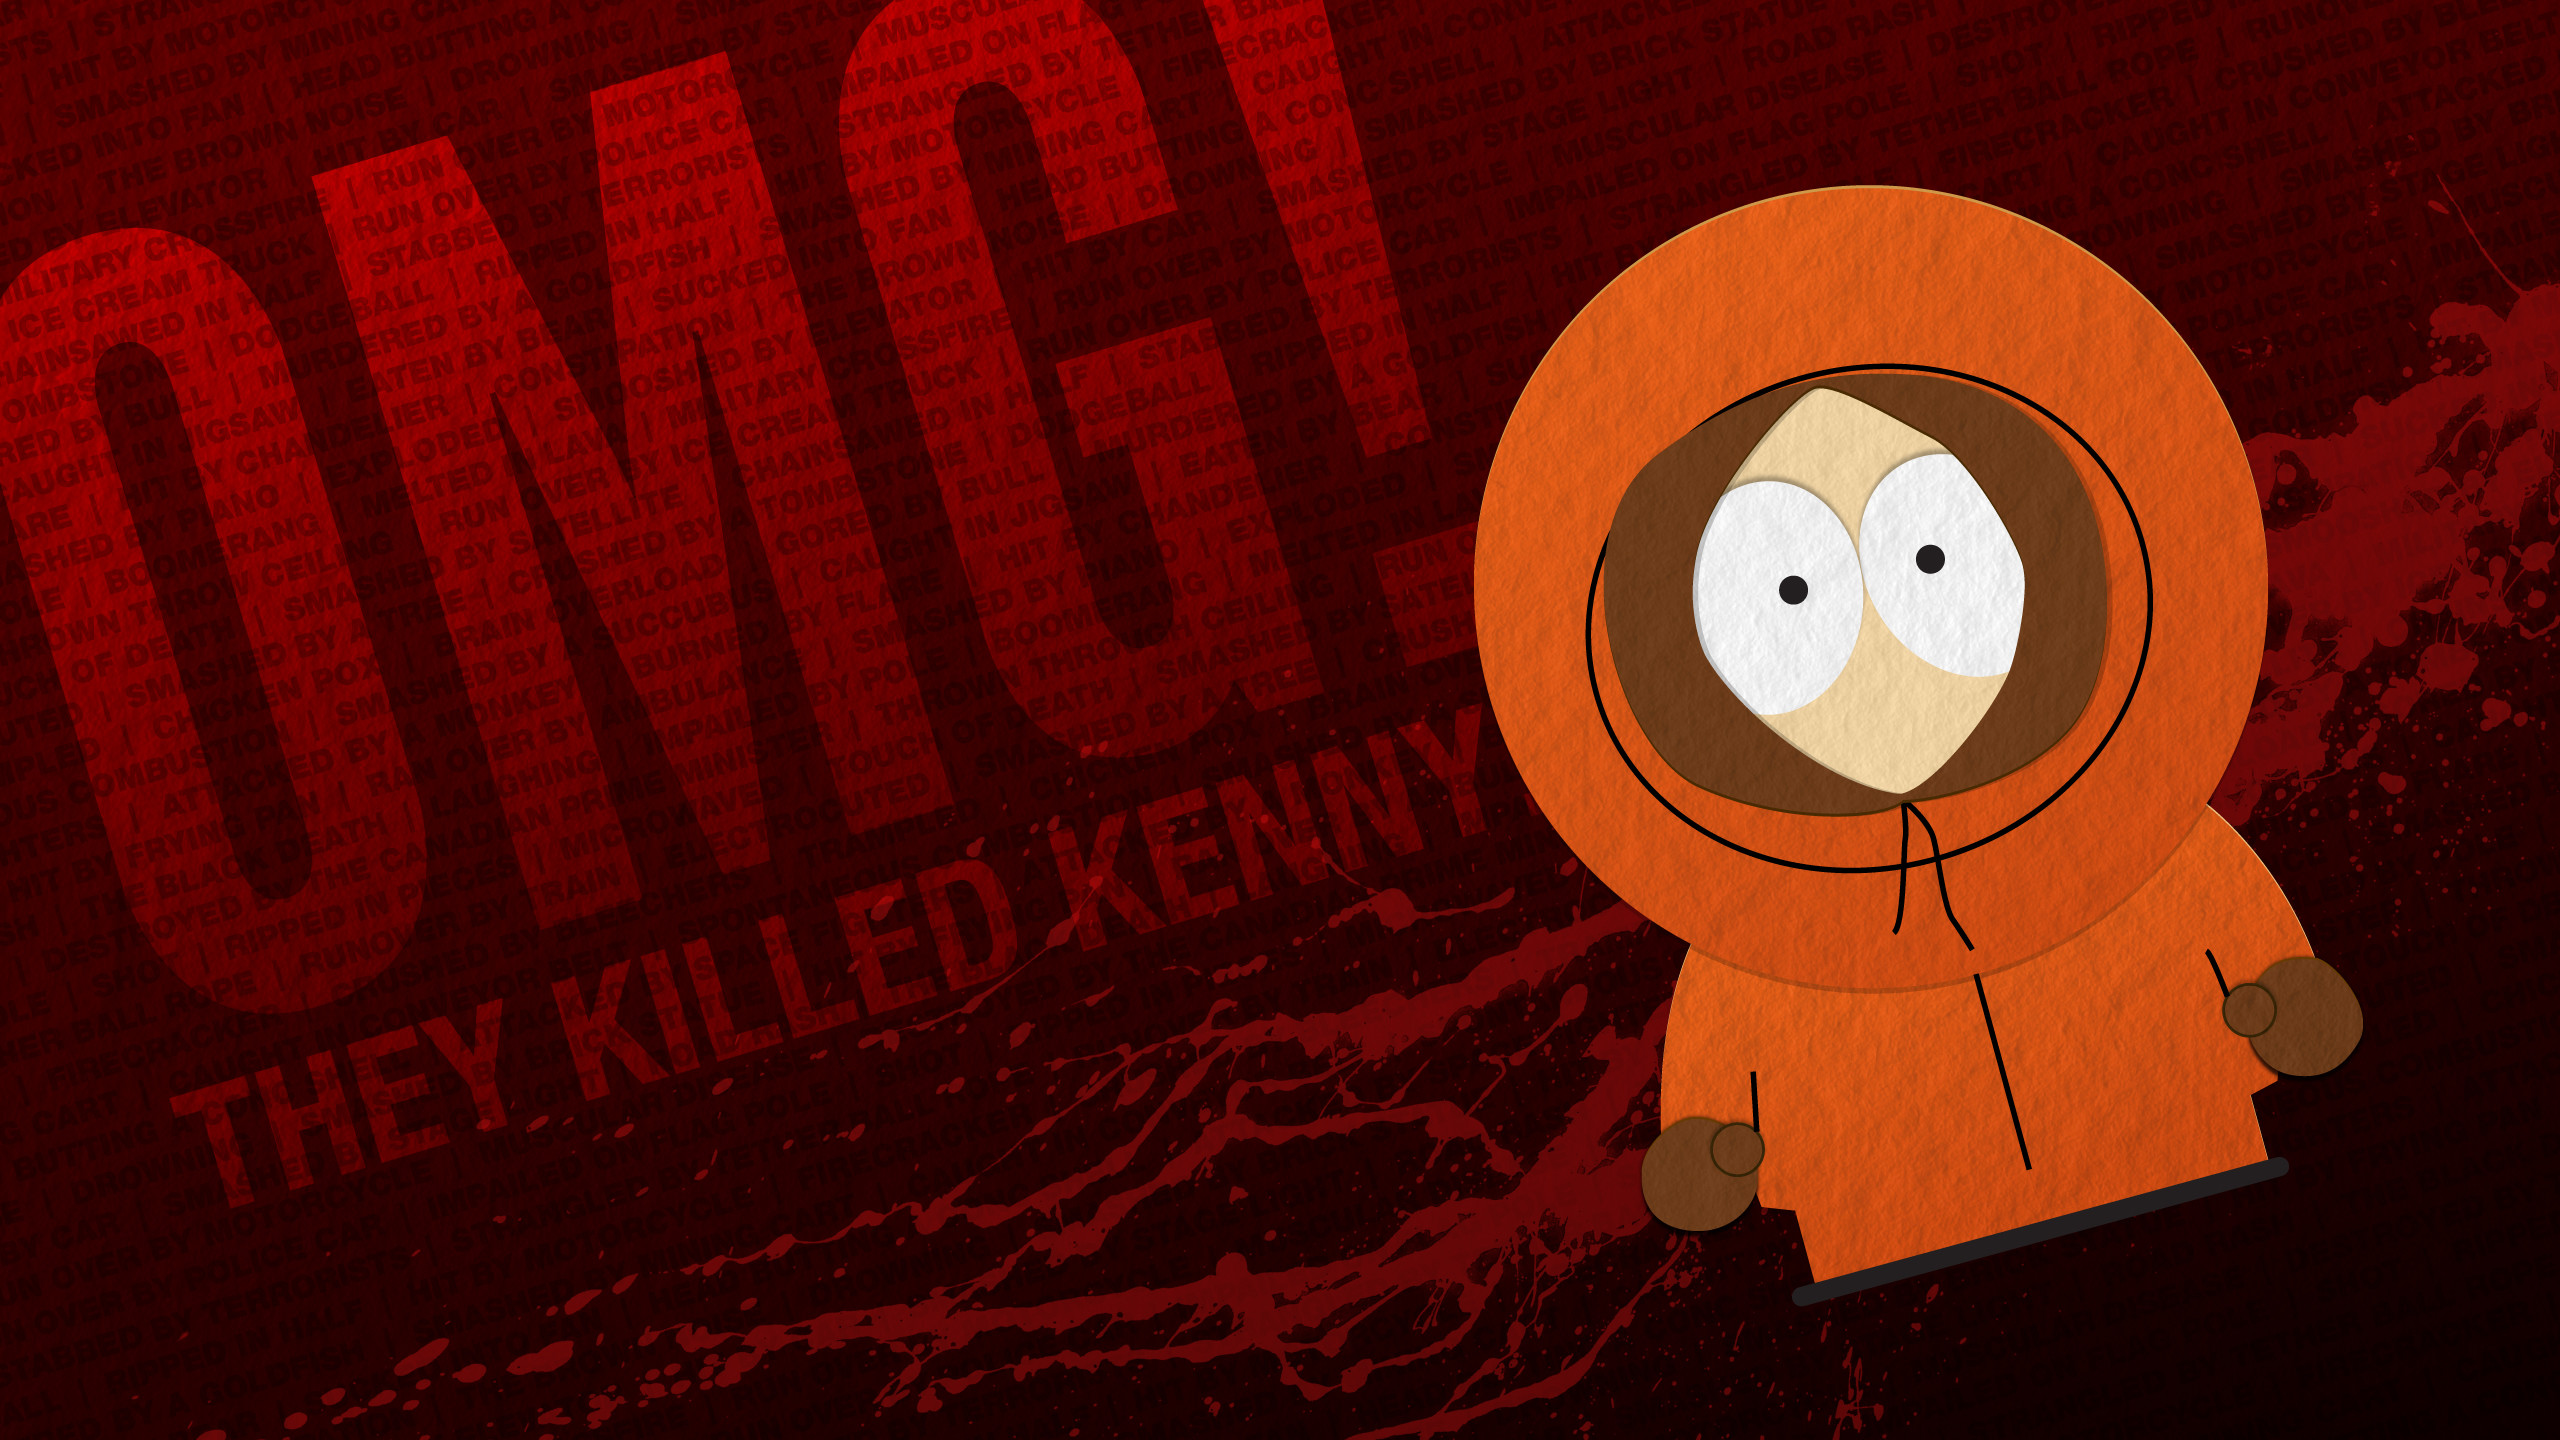 2560x1440 entries in South Park Wallpapers Cartman group